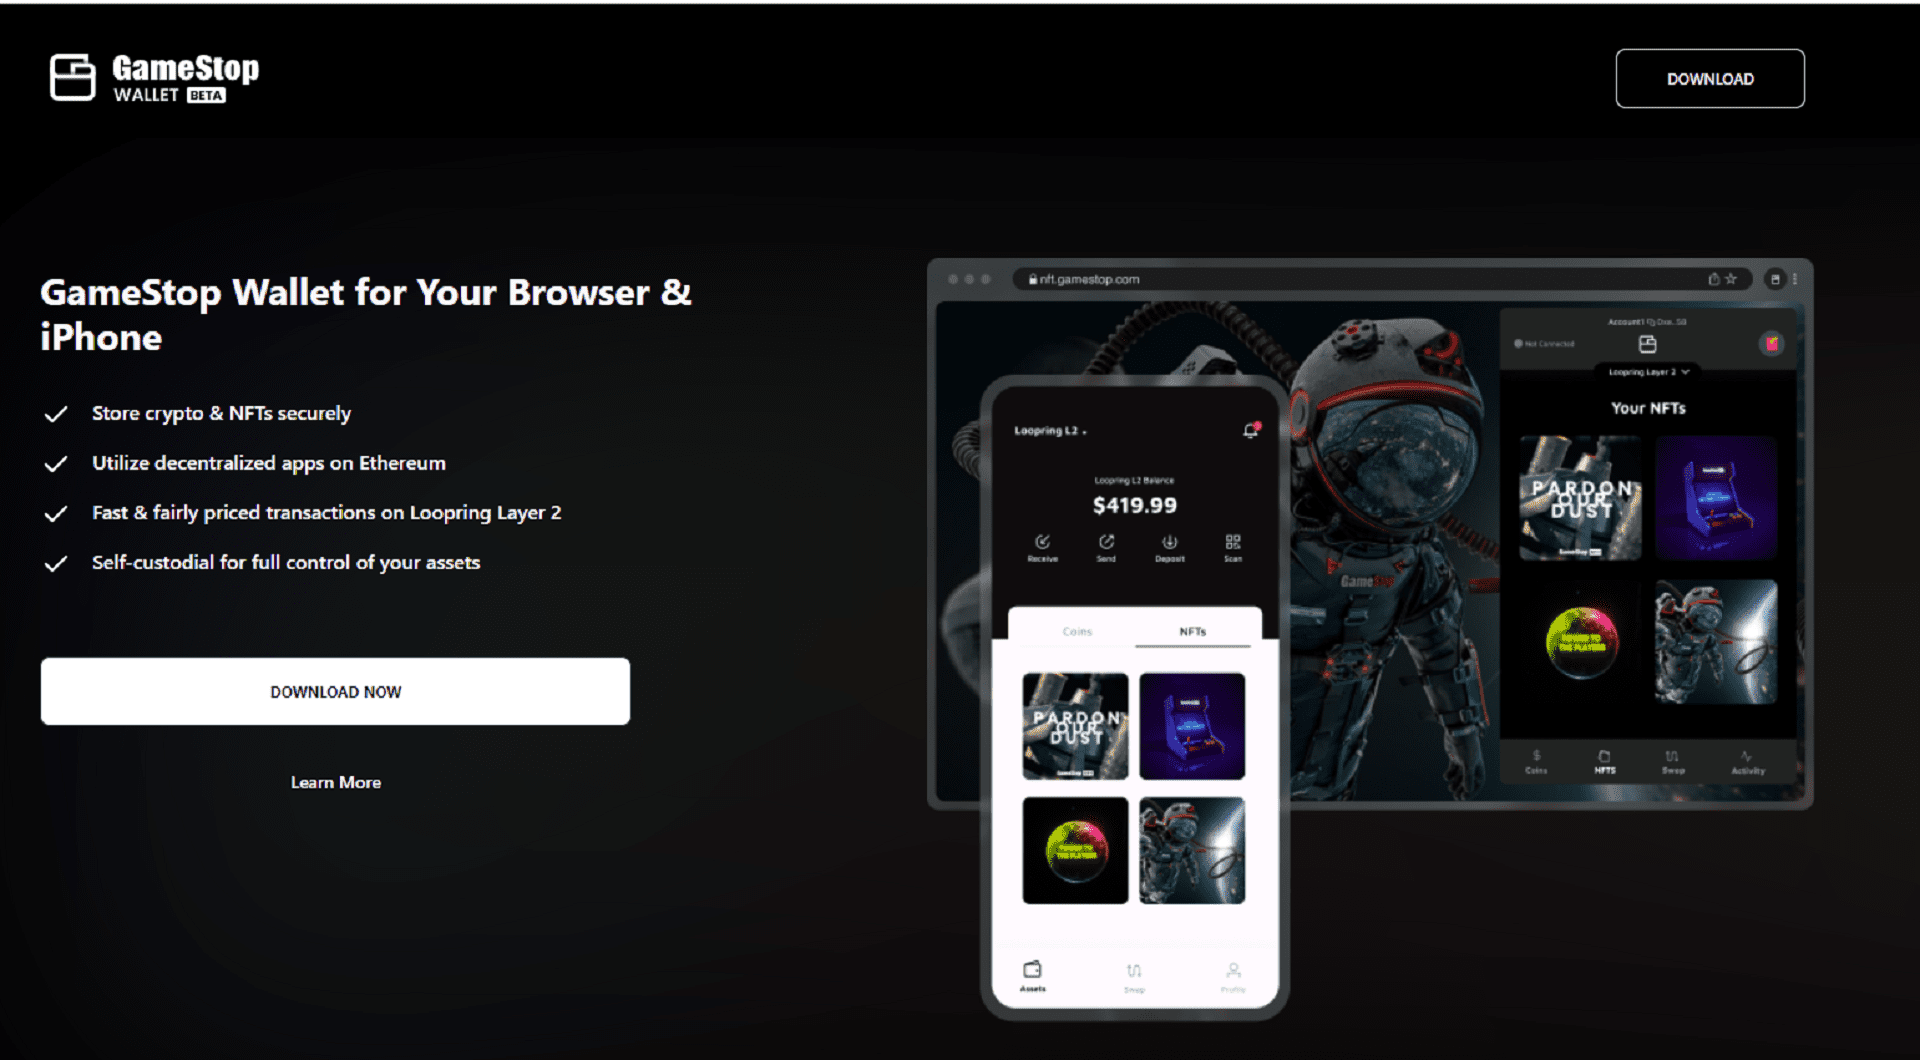 The GameStop crypto and NFT wallet is officially here